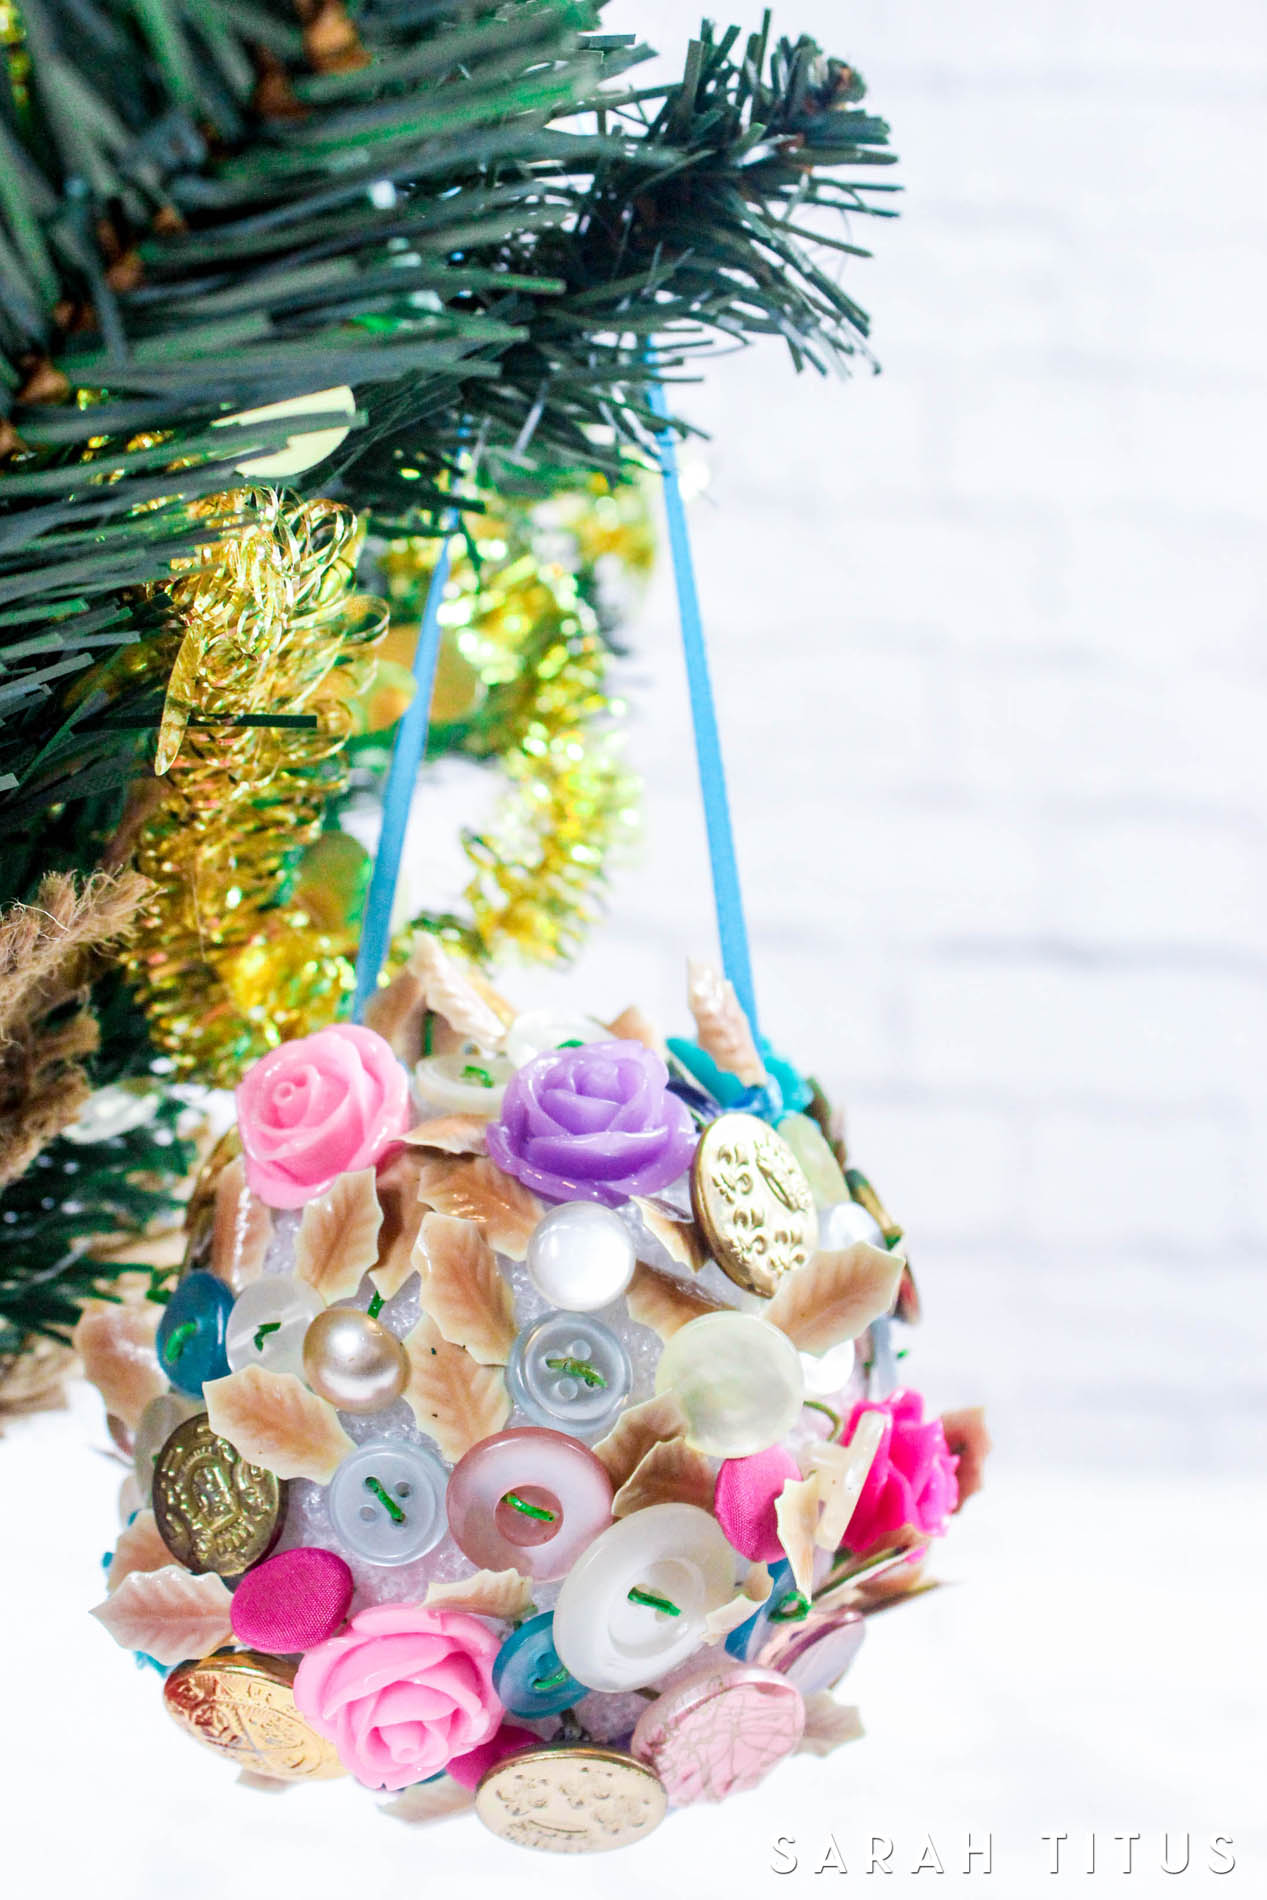 Make a button Christmas tree ornament for the holidays!